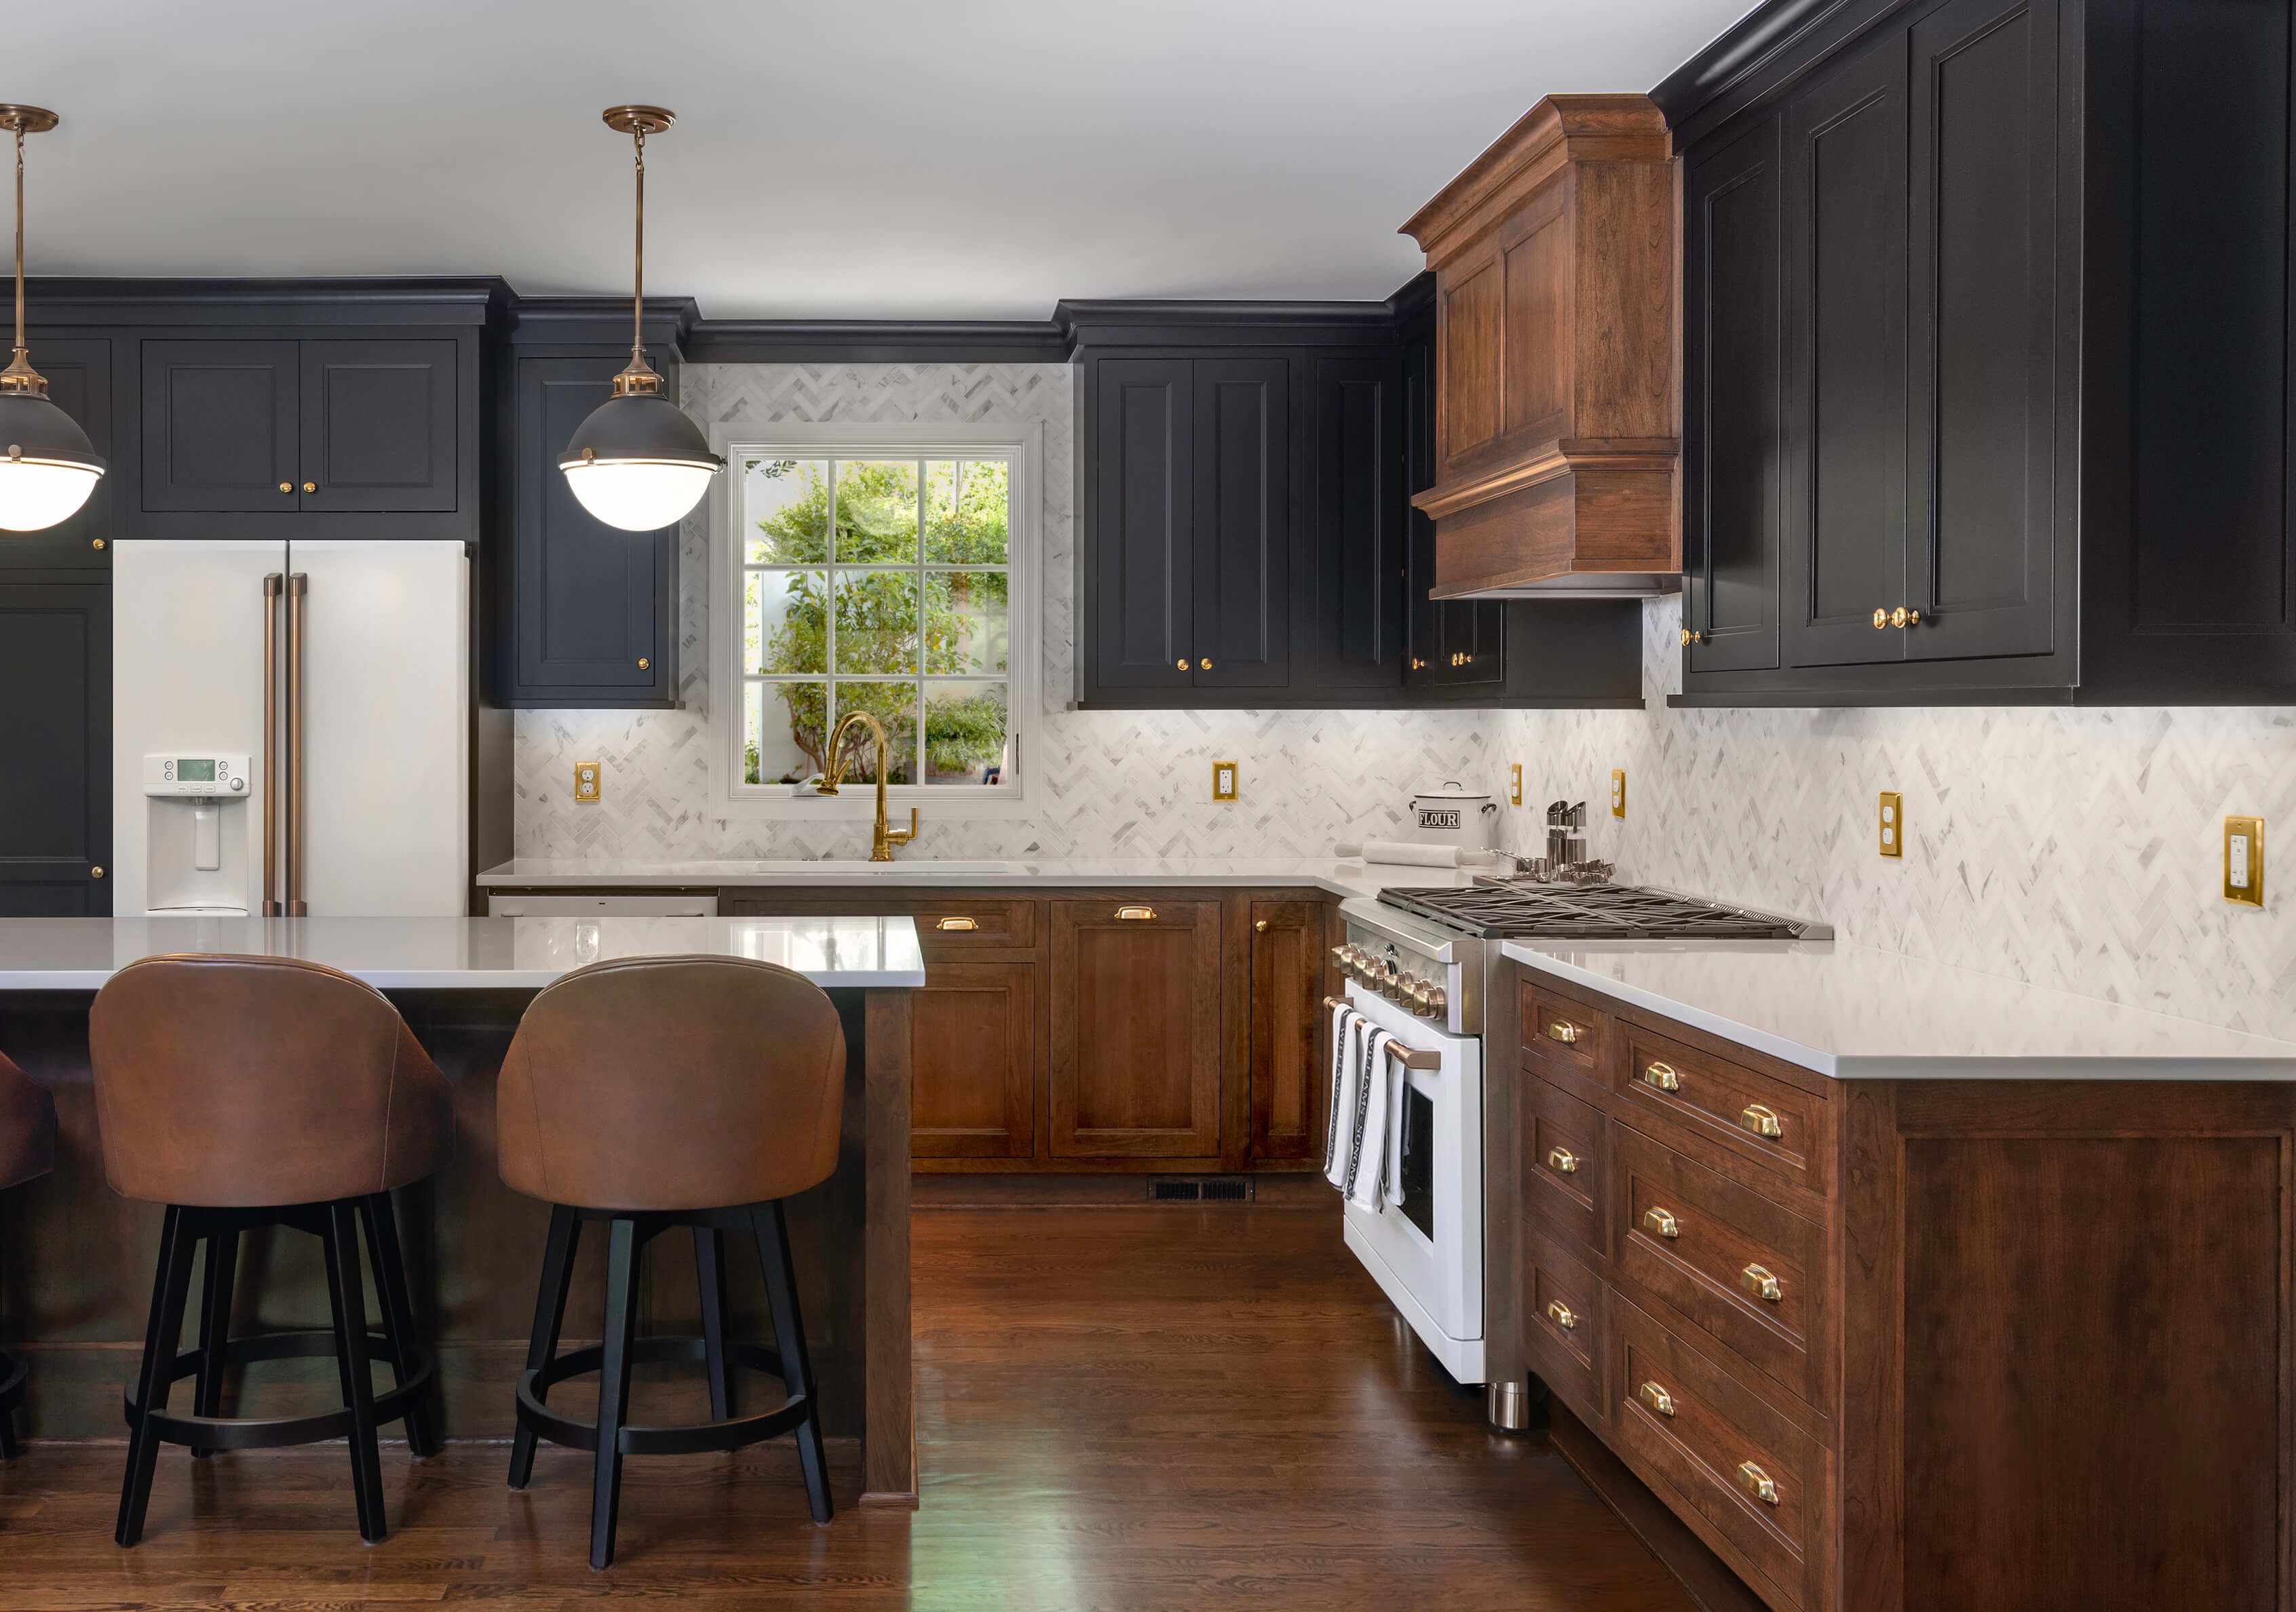 Black and Rich Cherry Wood Create a Romantic Kitchen Design in this newly remodeled kitchen in Virginia. Looking for something different than the white cabinets? Try black painted cabinets!